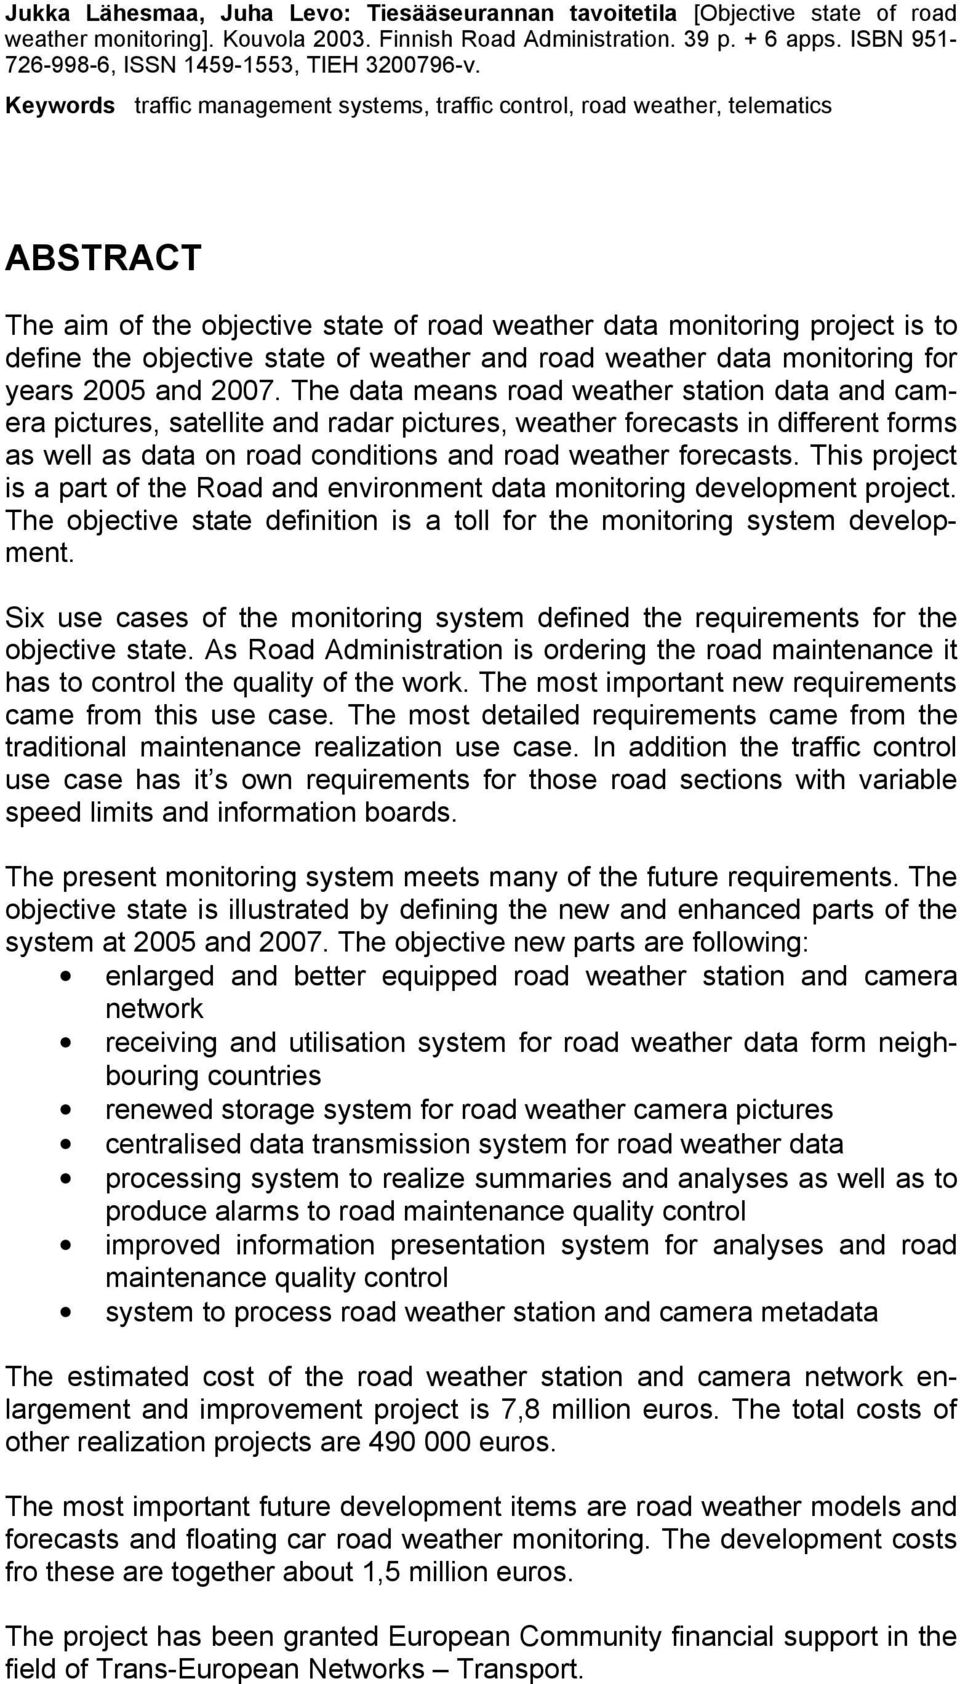 Keywords traffic management systems, traffic control, road weather, telematics ABSTRACT The aim of the objective state of road weather data monitoring project is to define the objective state of